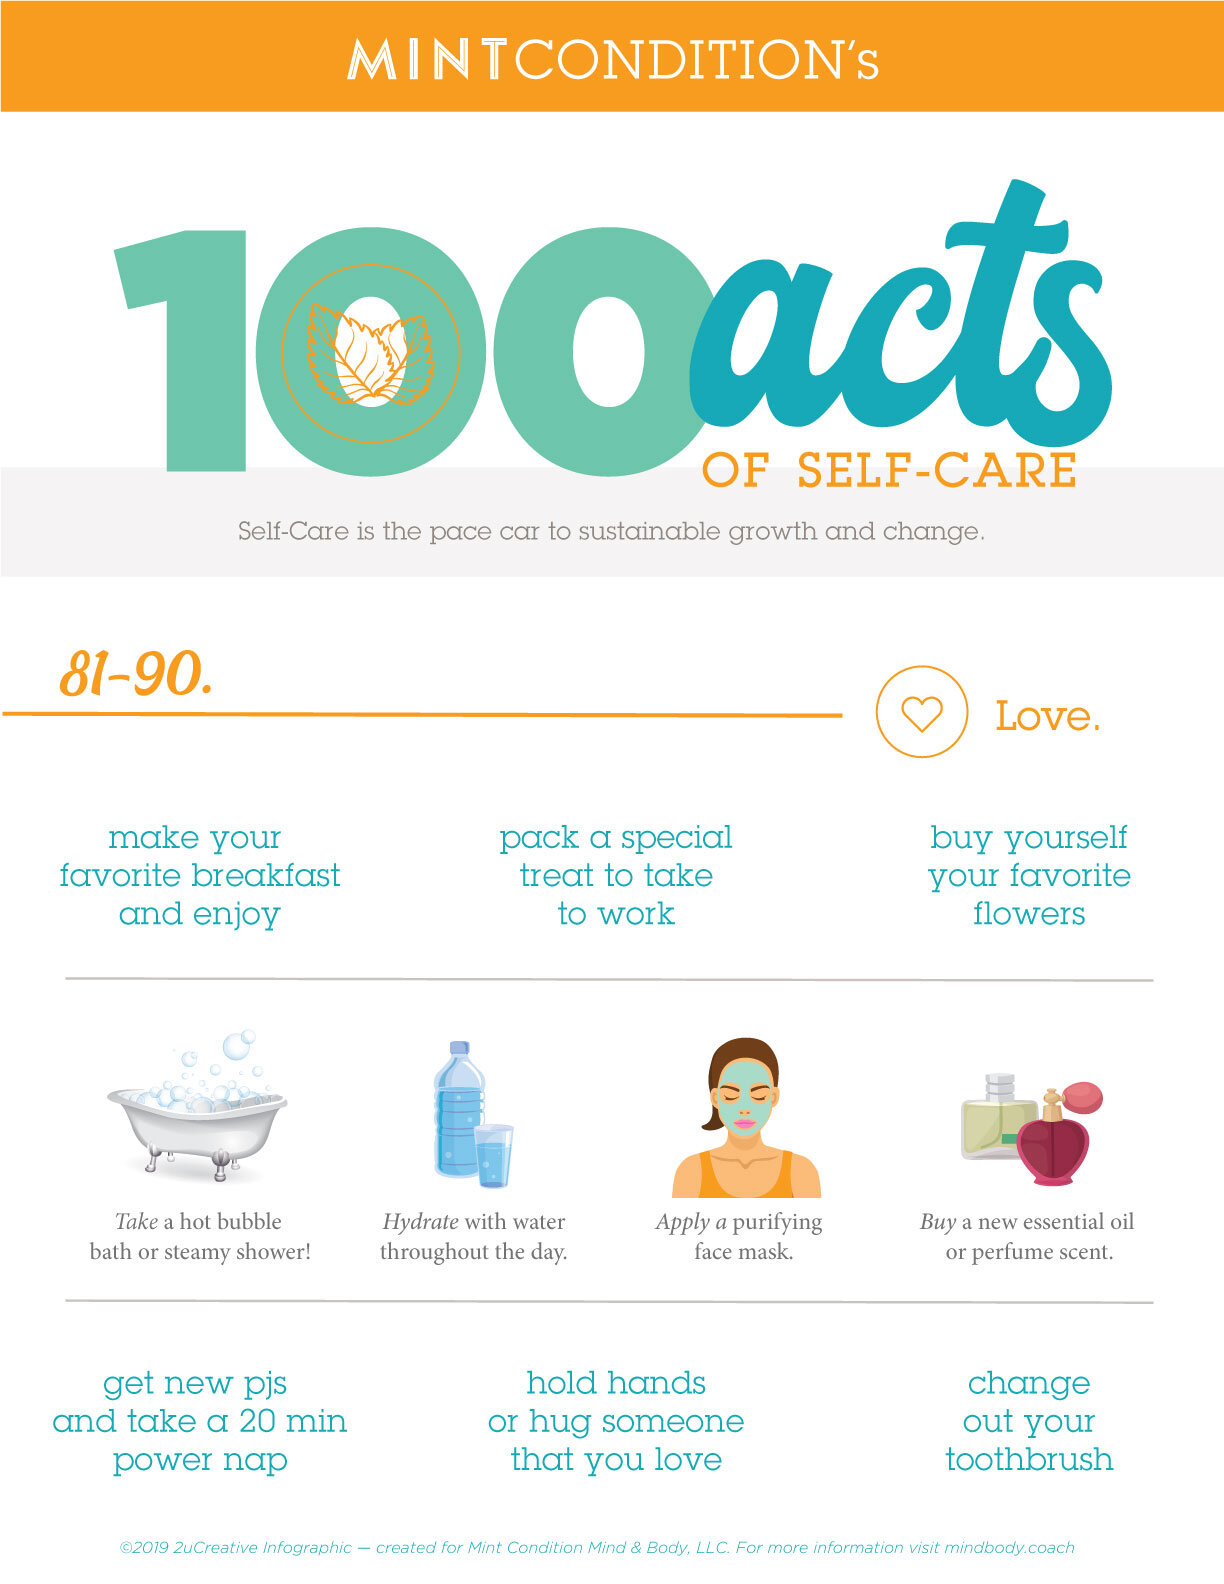 100-acts-infographics-81-90.jpg